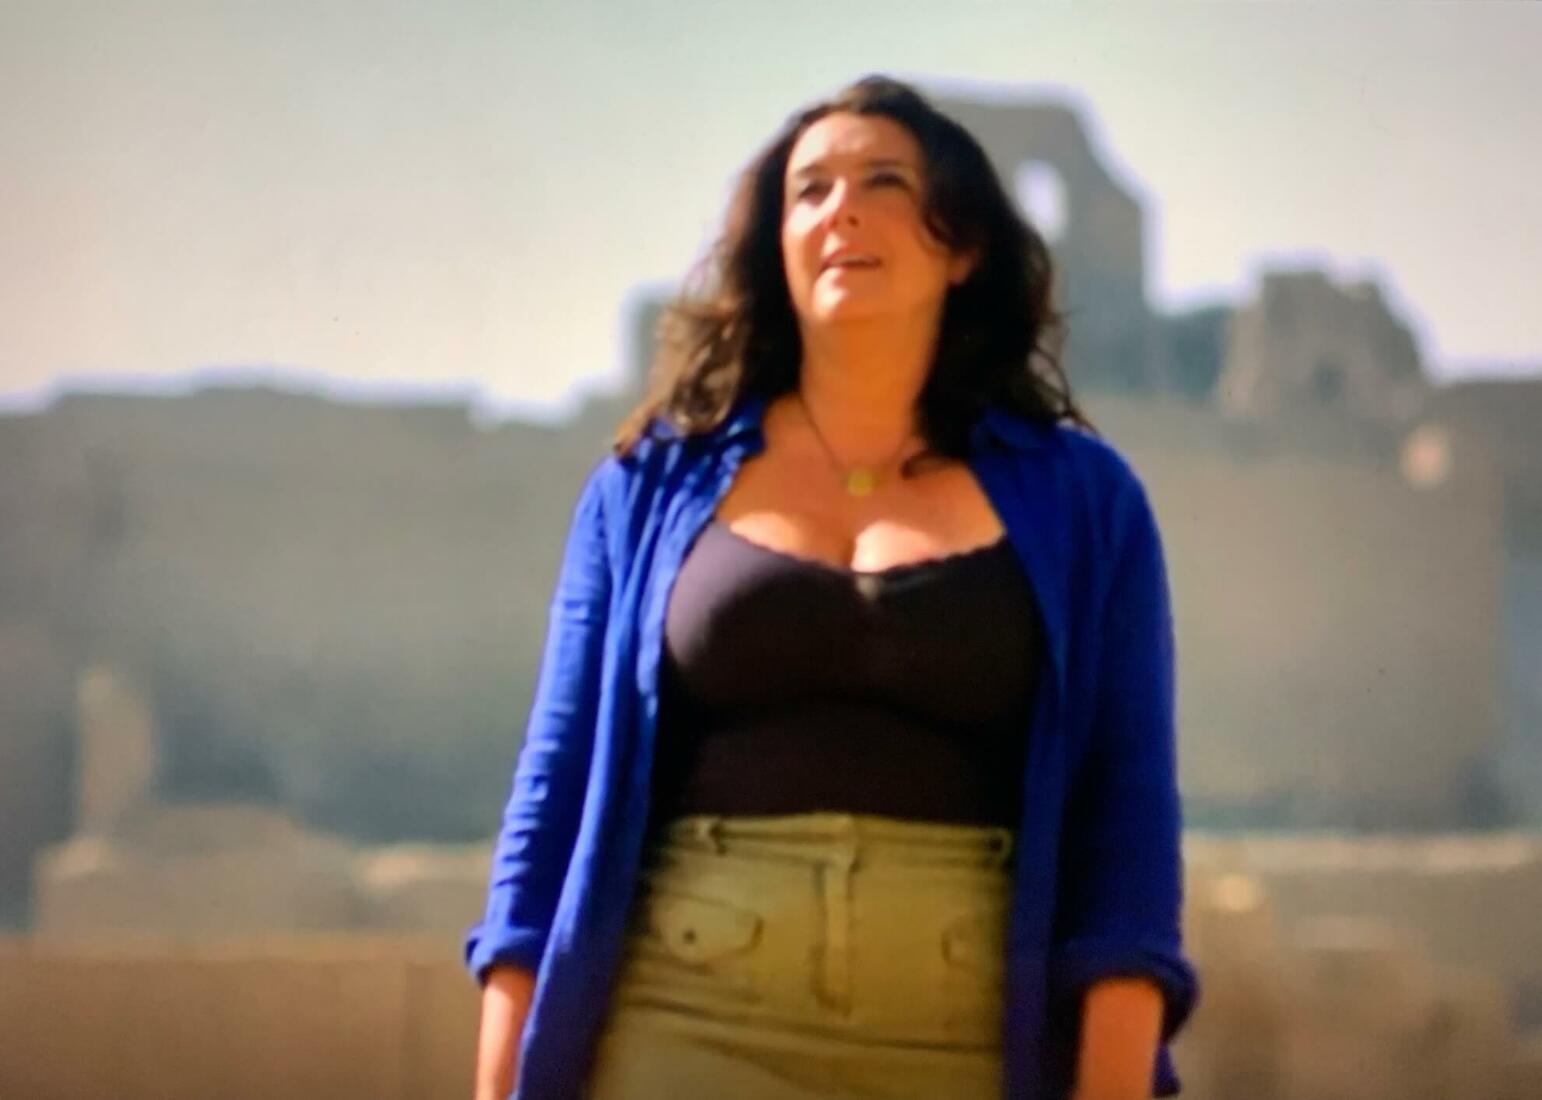 All posts from Robnorm100 in Bettany Hughes - Curvage.